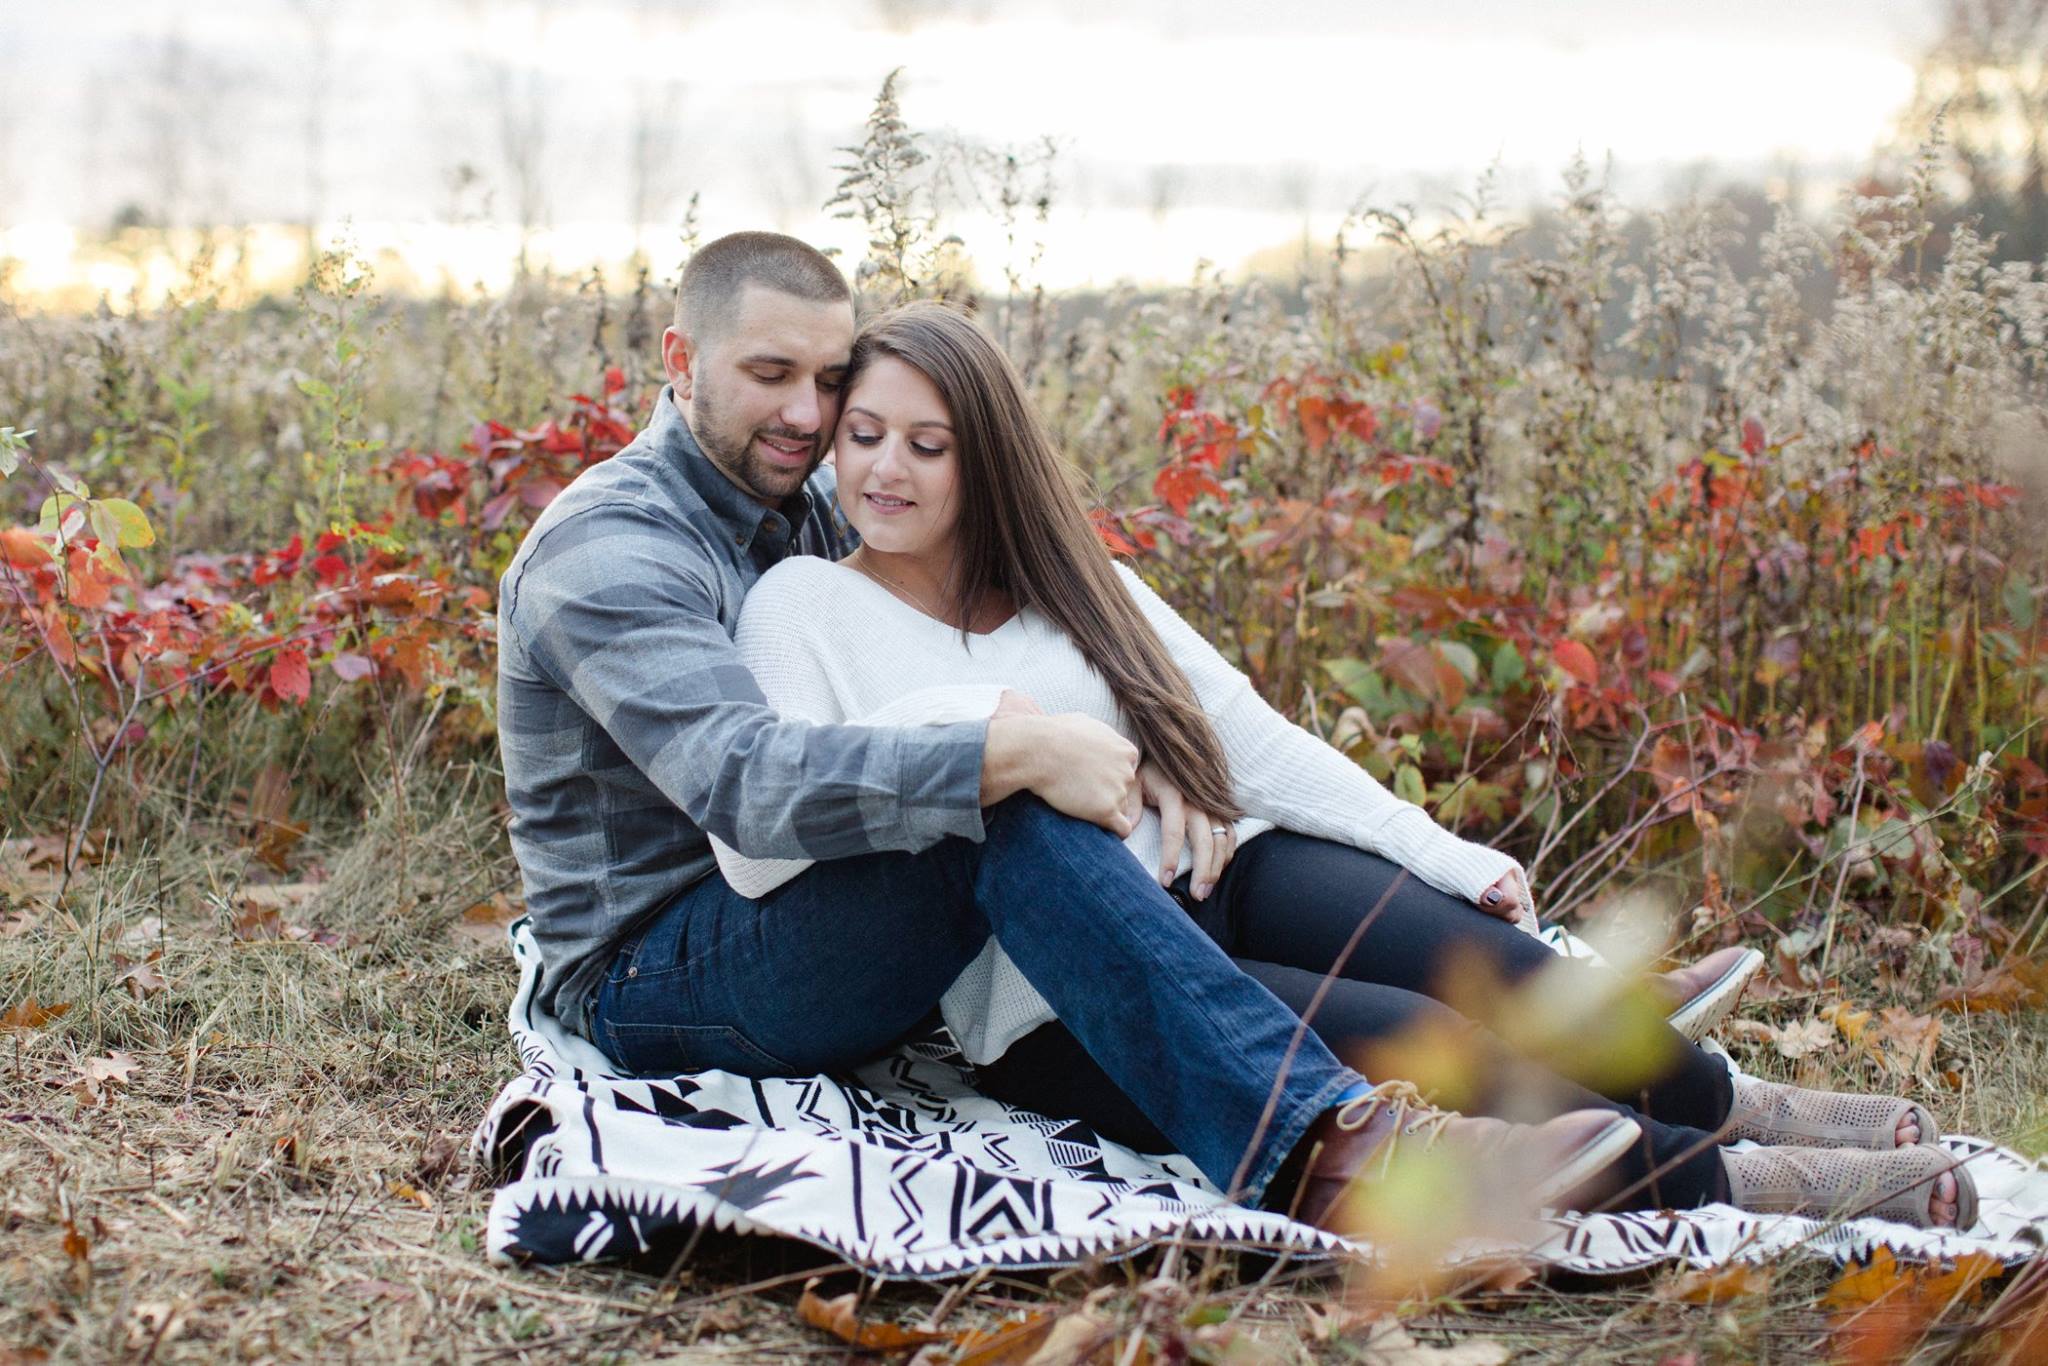 Moffat Estste Moscow PA Fall Engagement Session Photos_8.jpg